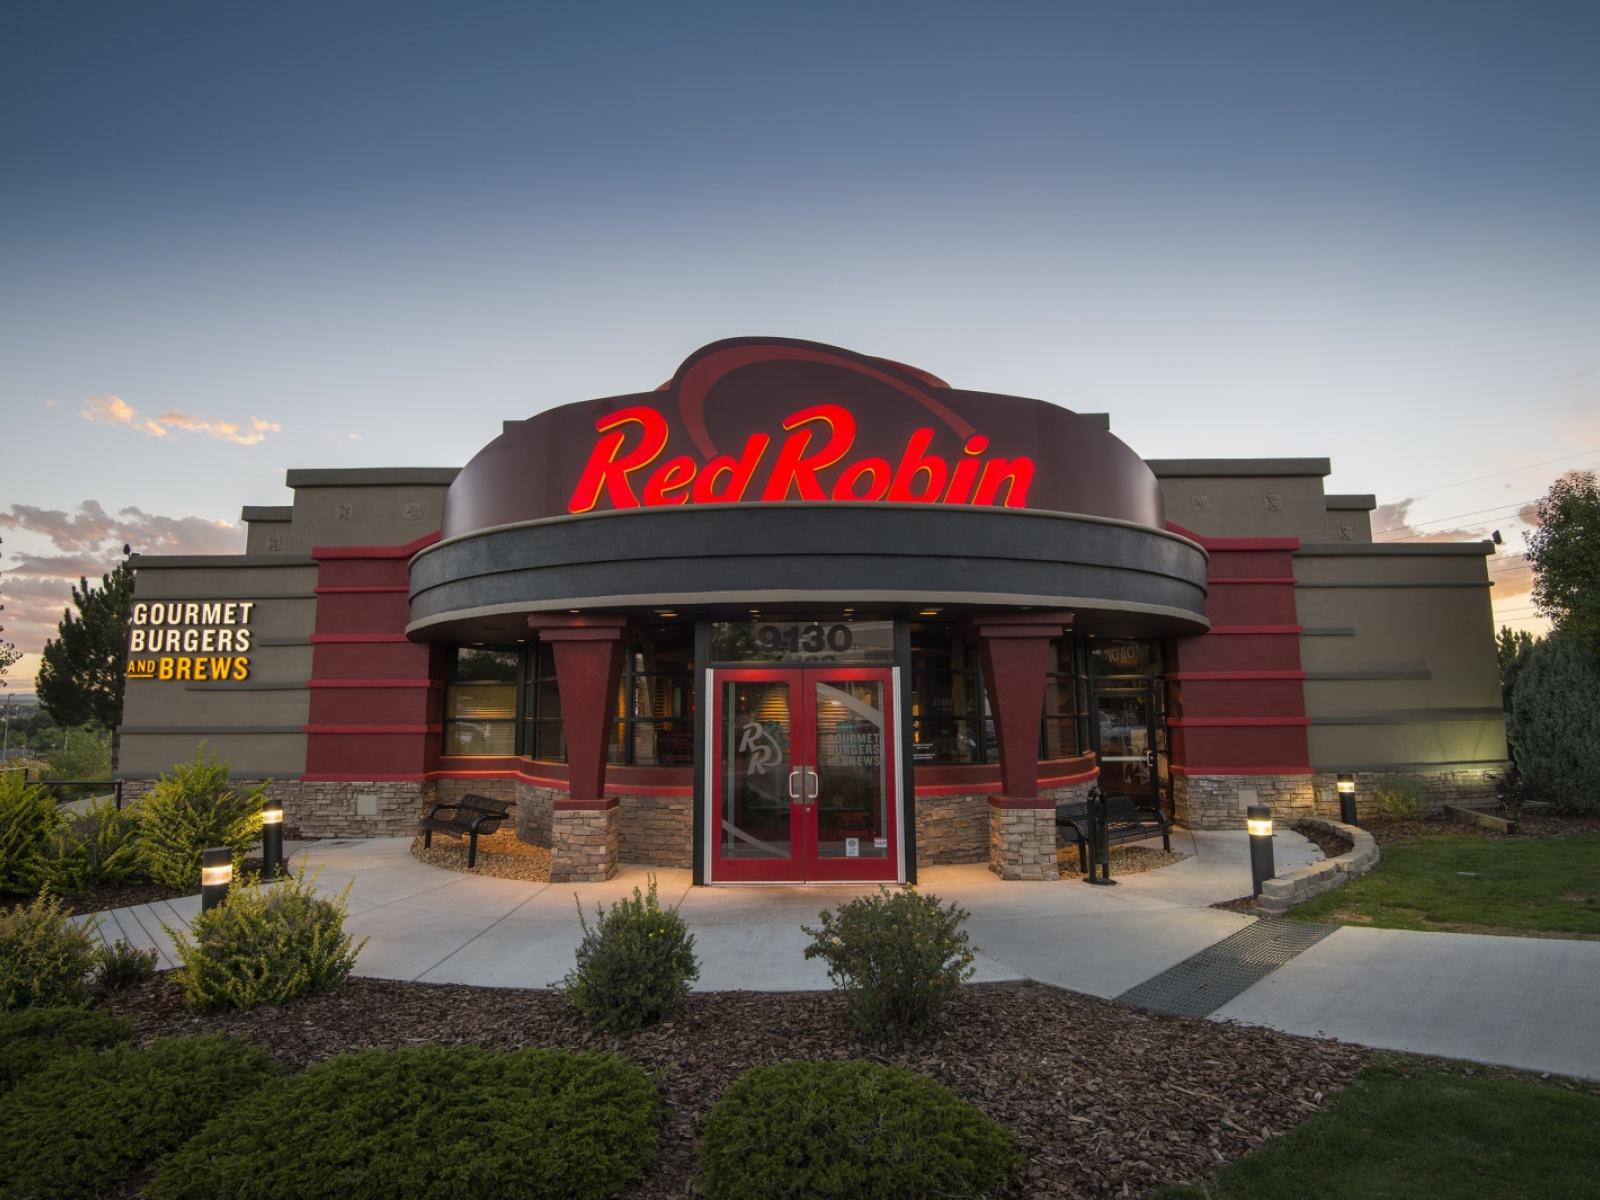 Red Robin exterior signage